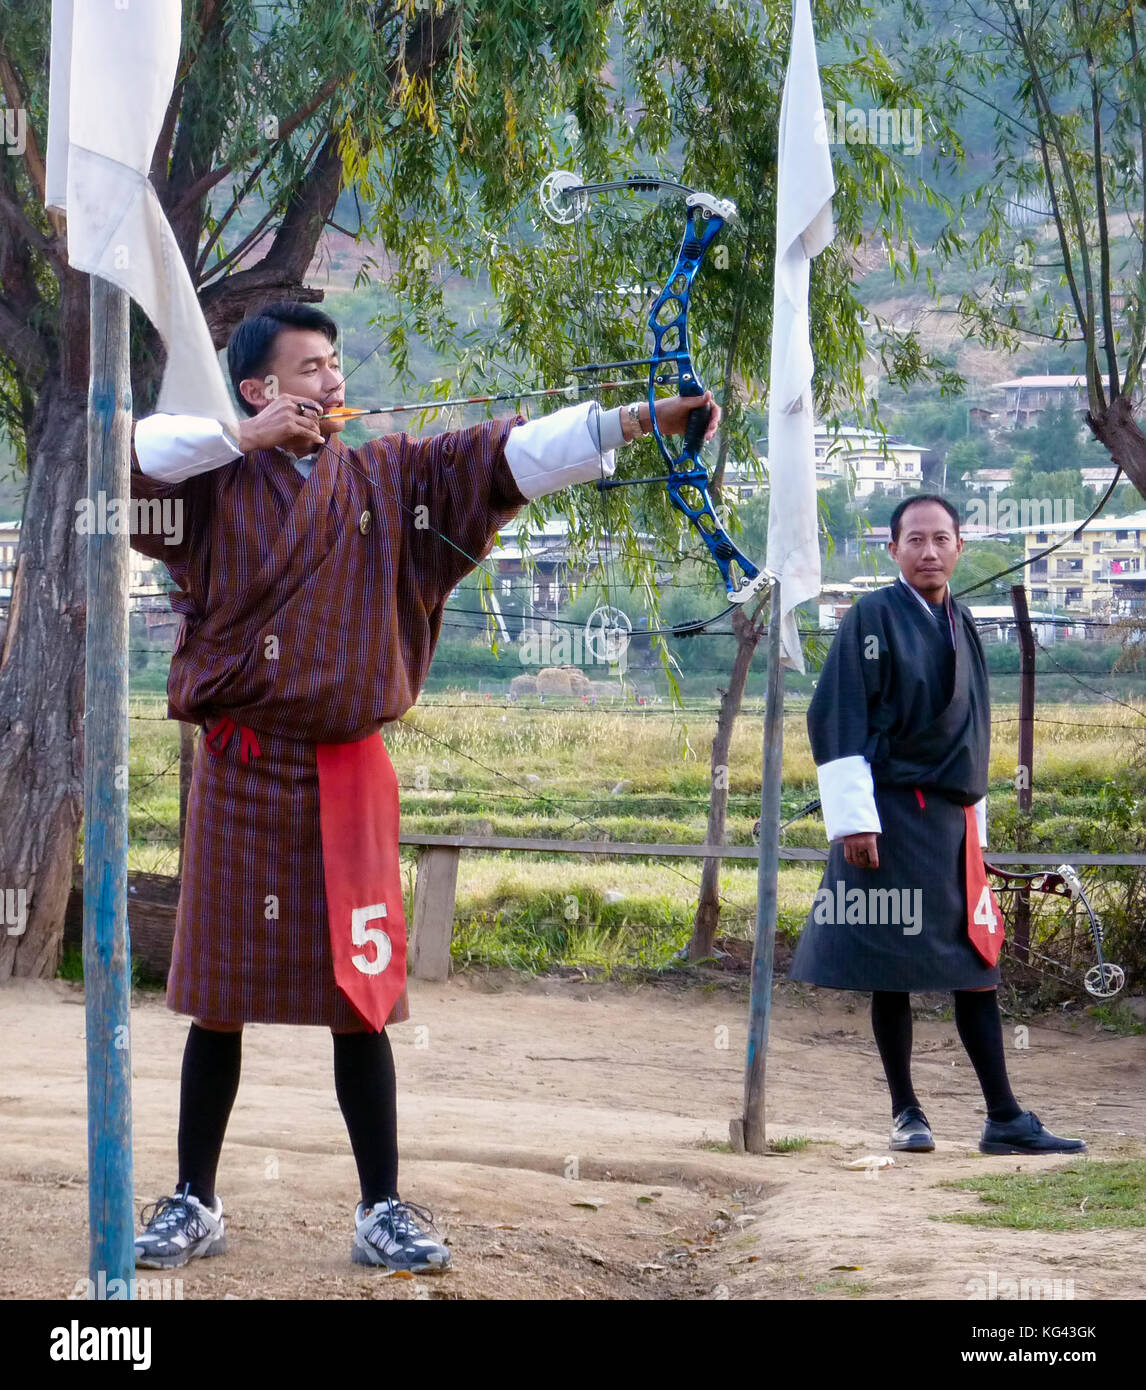 Bhutanese men competes in a game of archery in Timphu, Bhutan. Stock Photo